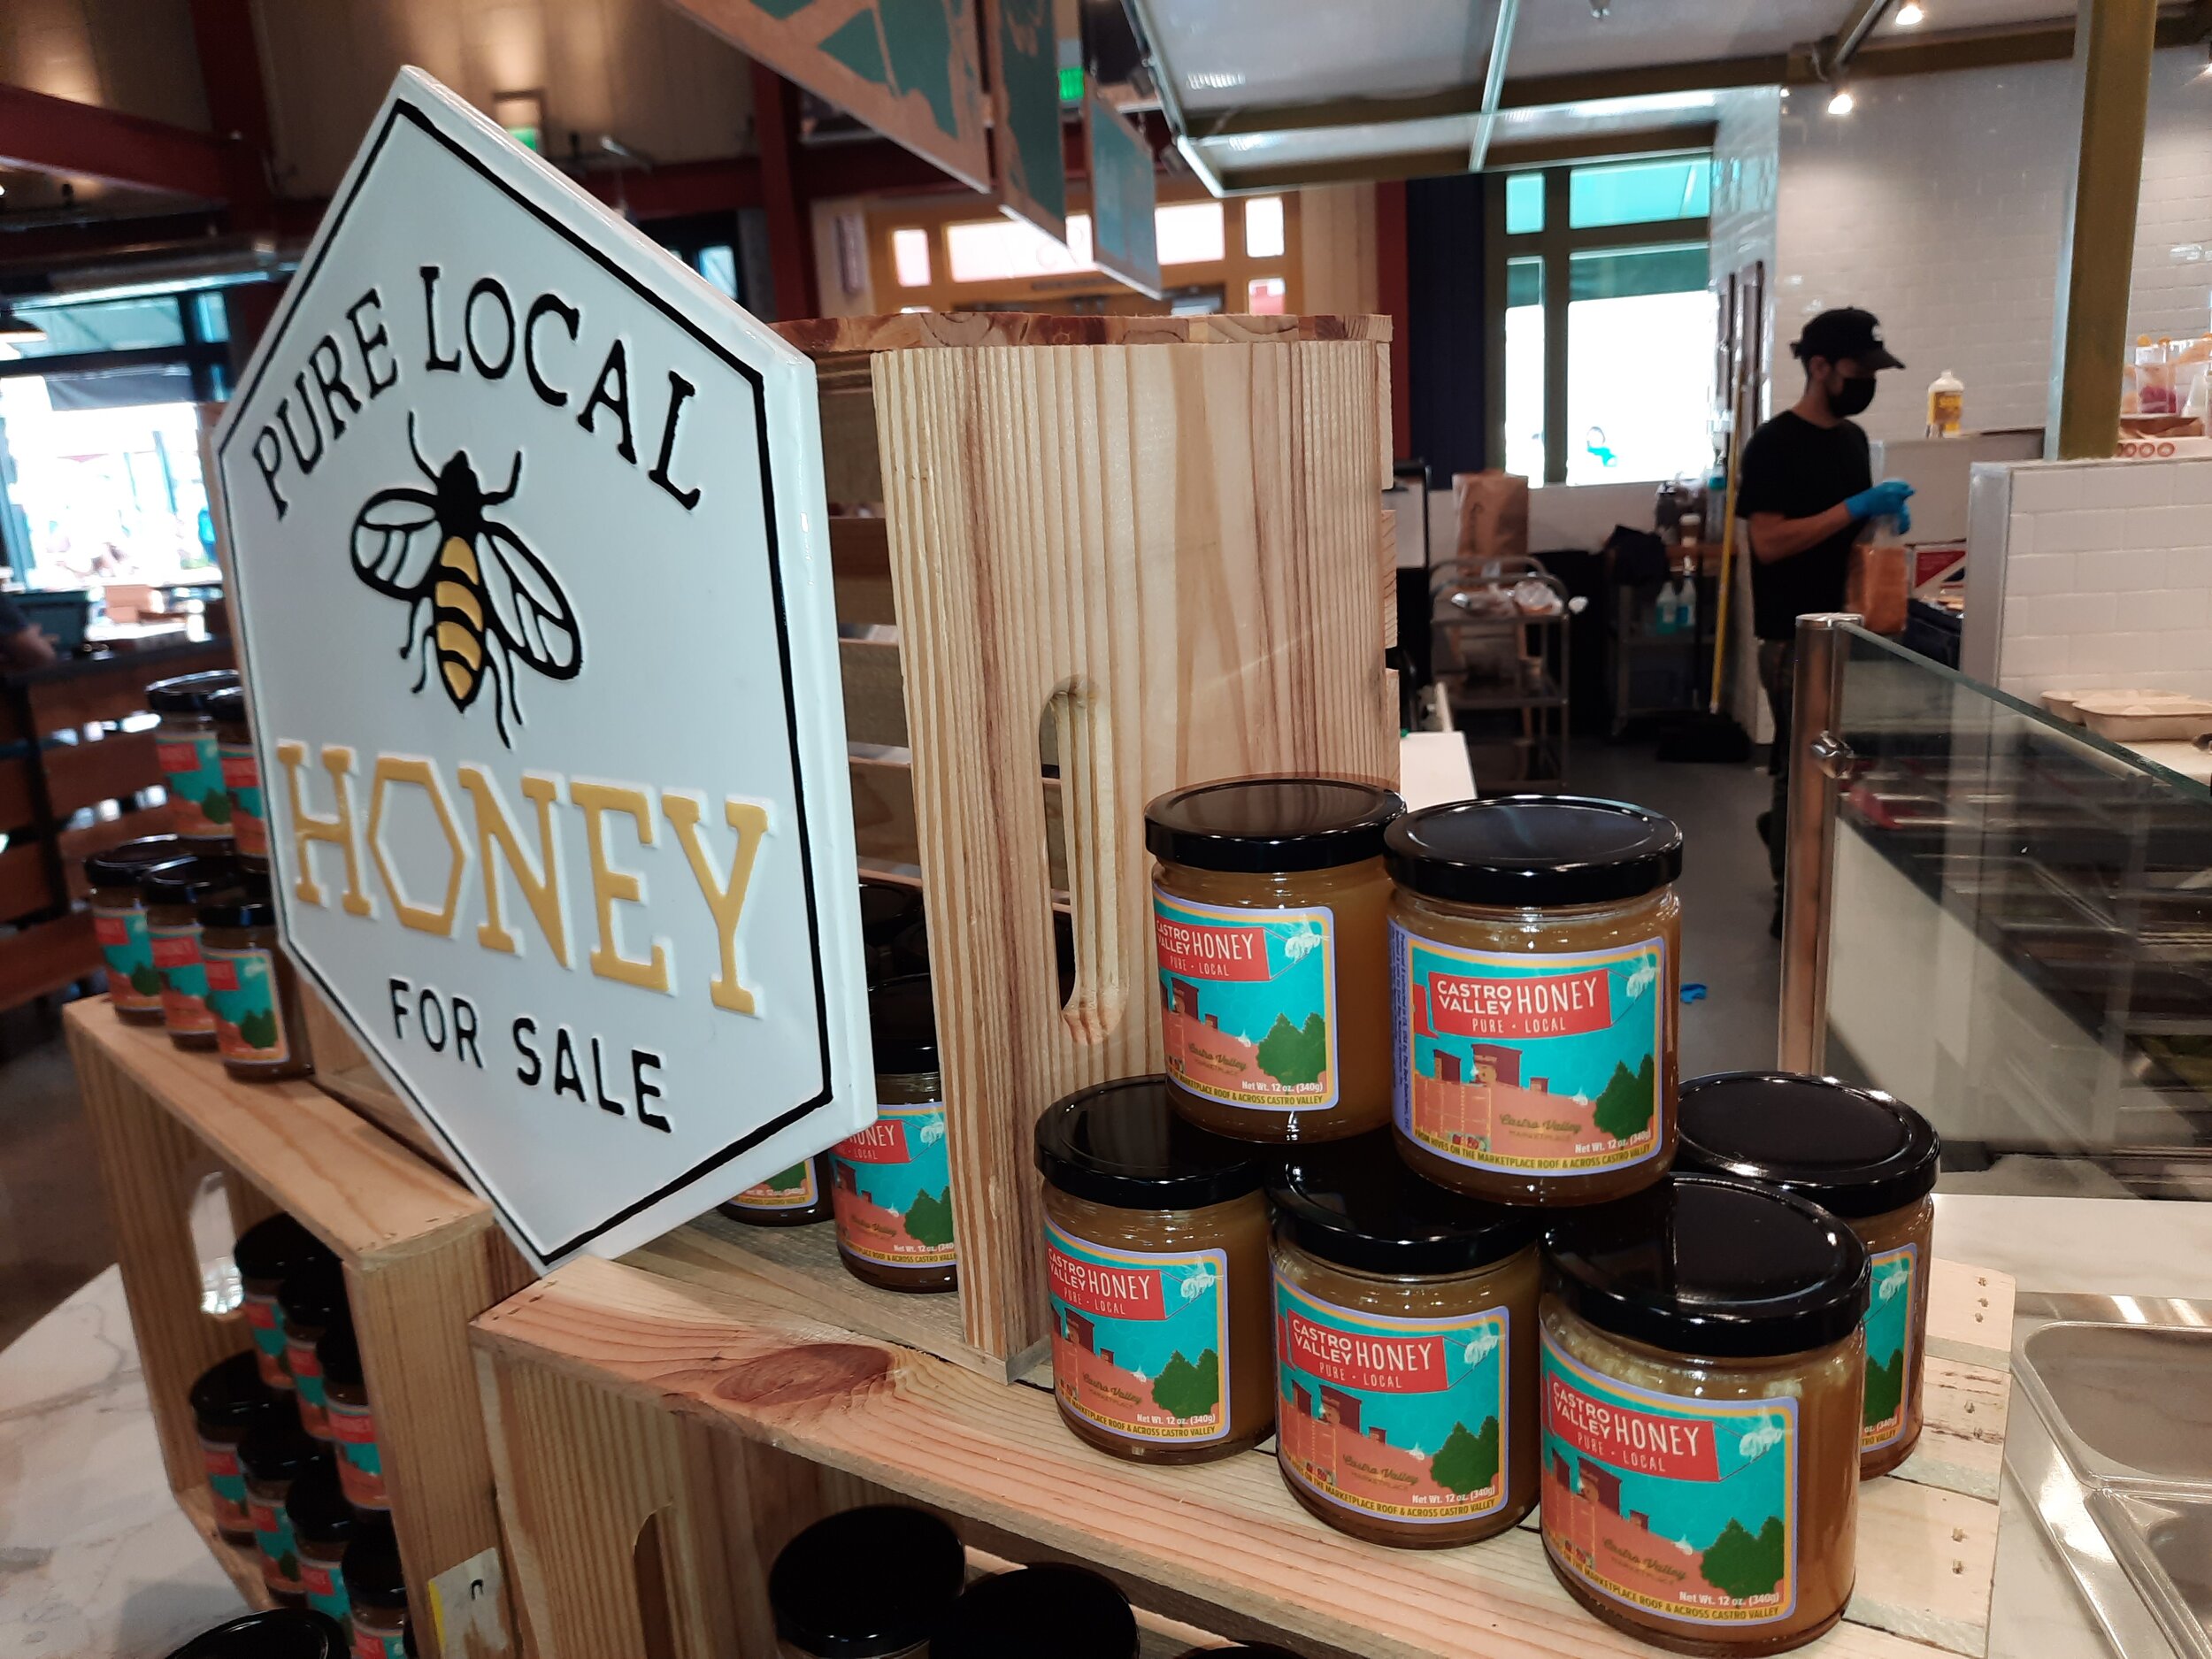   Natural Grocery harvested 250&nbsp;pounds of honey this year at it’s CV location.  